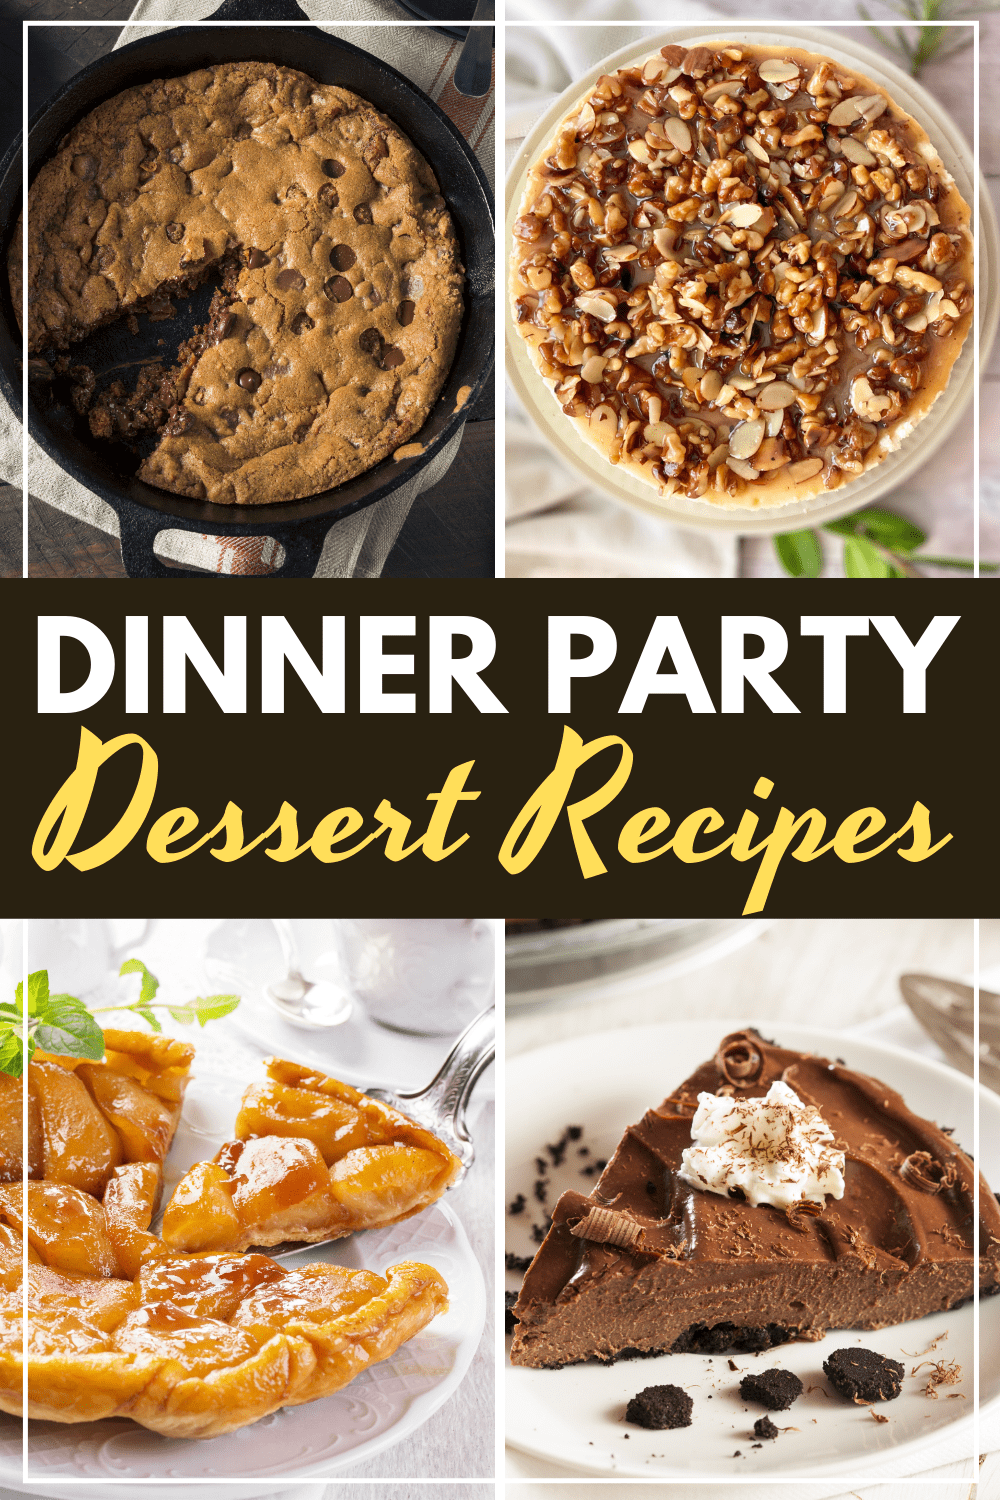 Top Dinner Party Desserts Recipes / Quick and easy dinner party ...